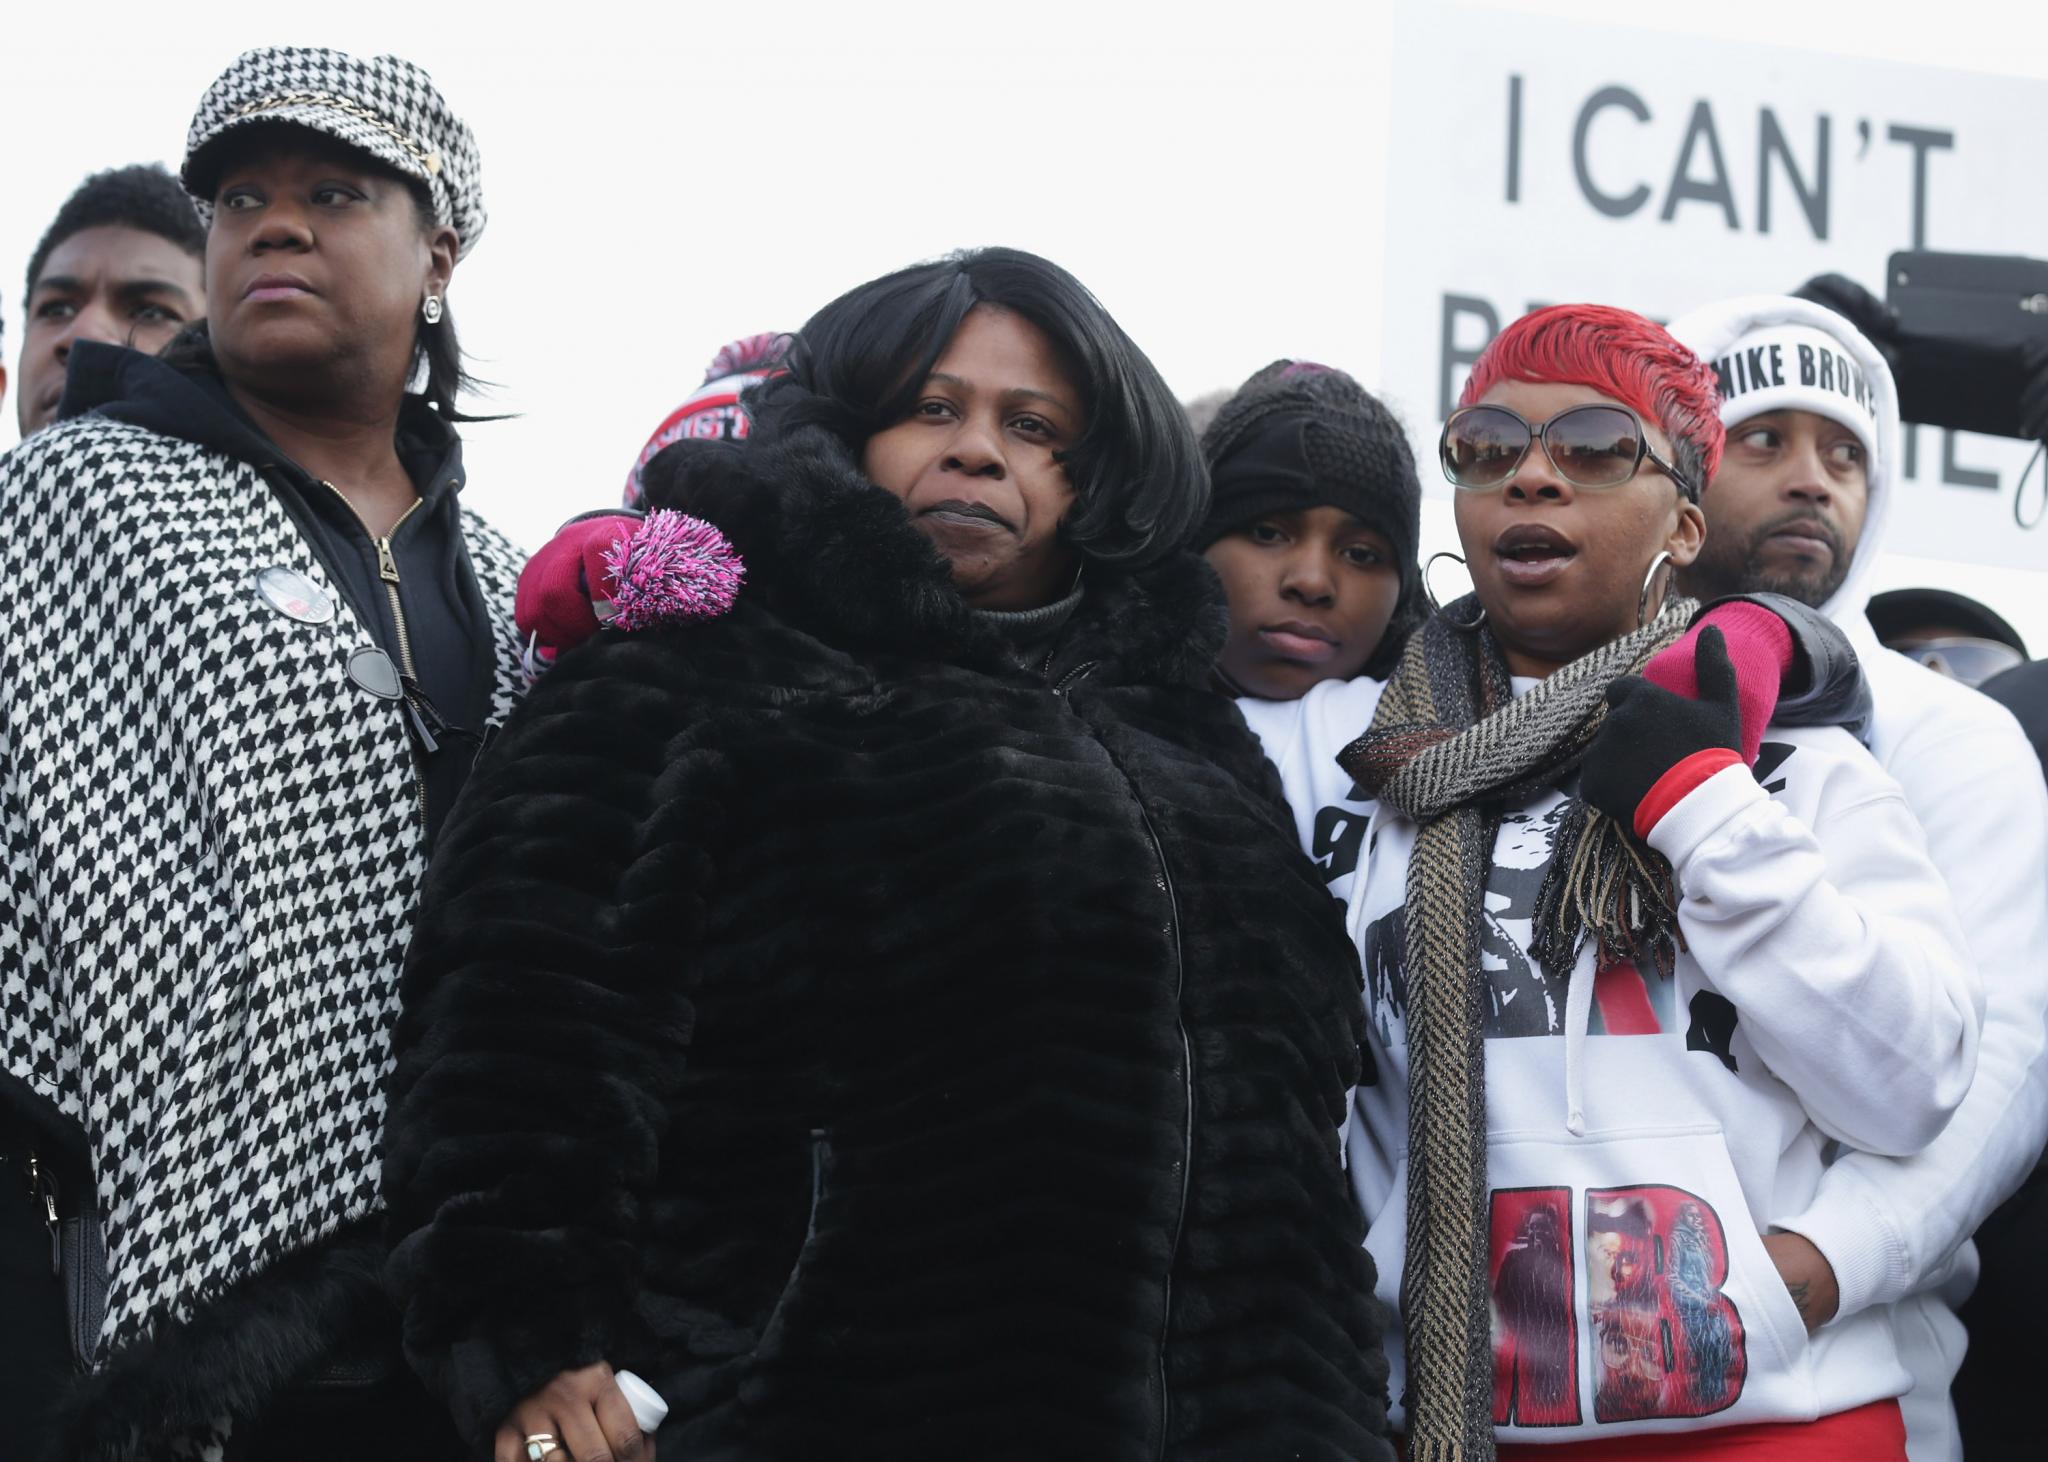 The Families of Trayvon Martin, Eric Garner, Michael Brown and Tamir Rice Join "Justice for All" March